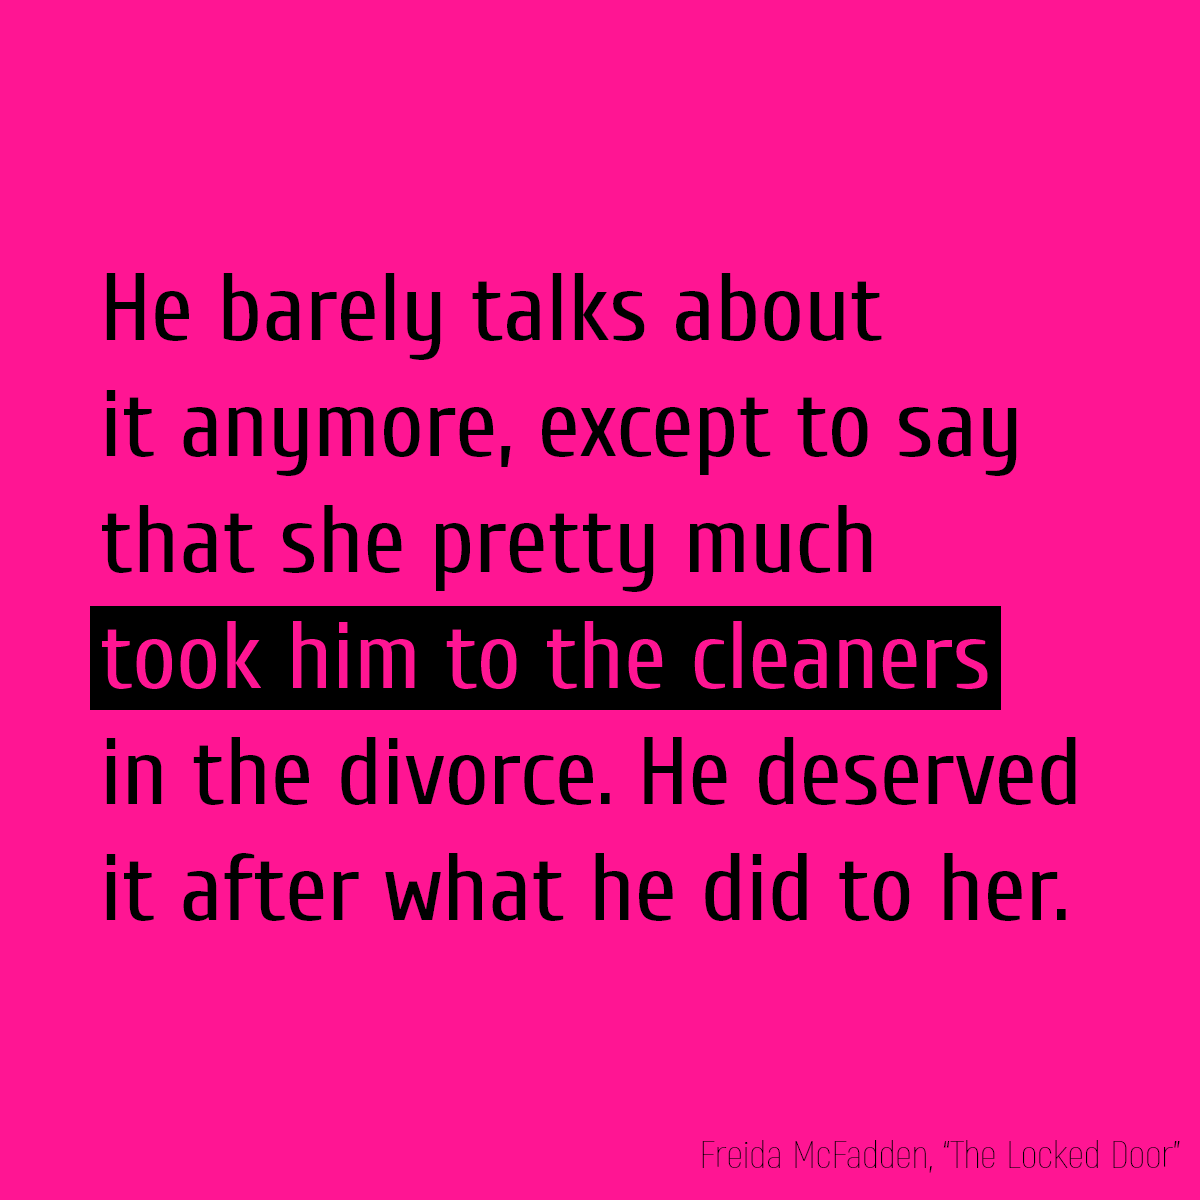 He barely talks about it anymore, except to say that she pretty much **took him to the cleaners** in the divorce. He deserved it after what he did to her.